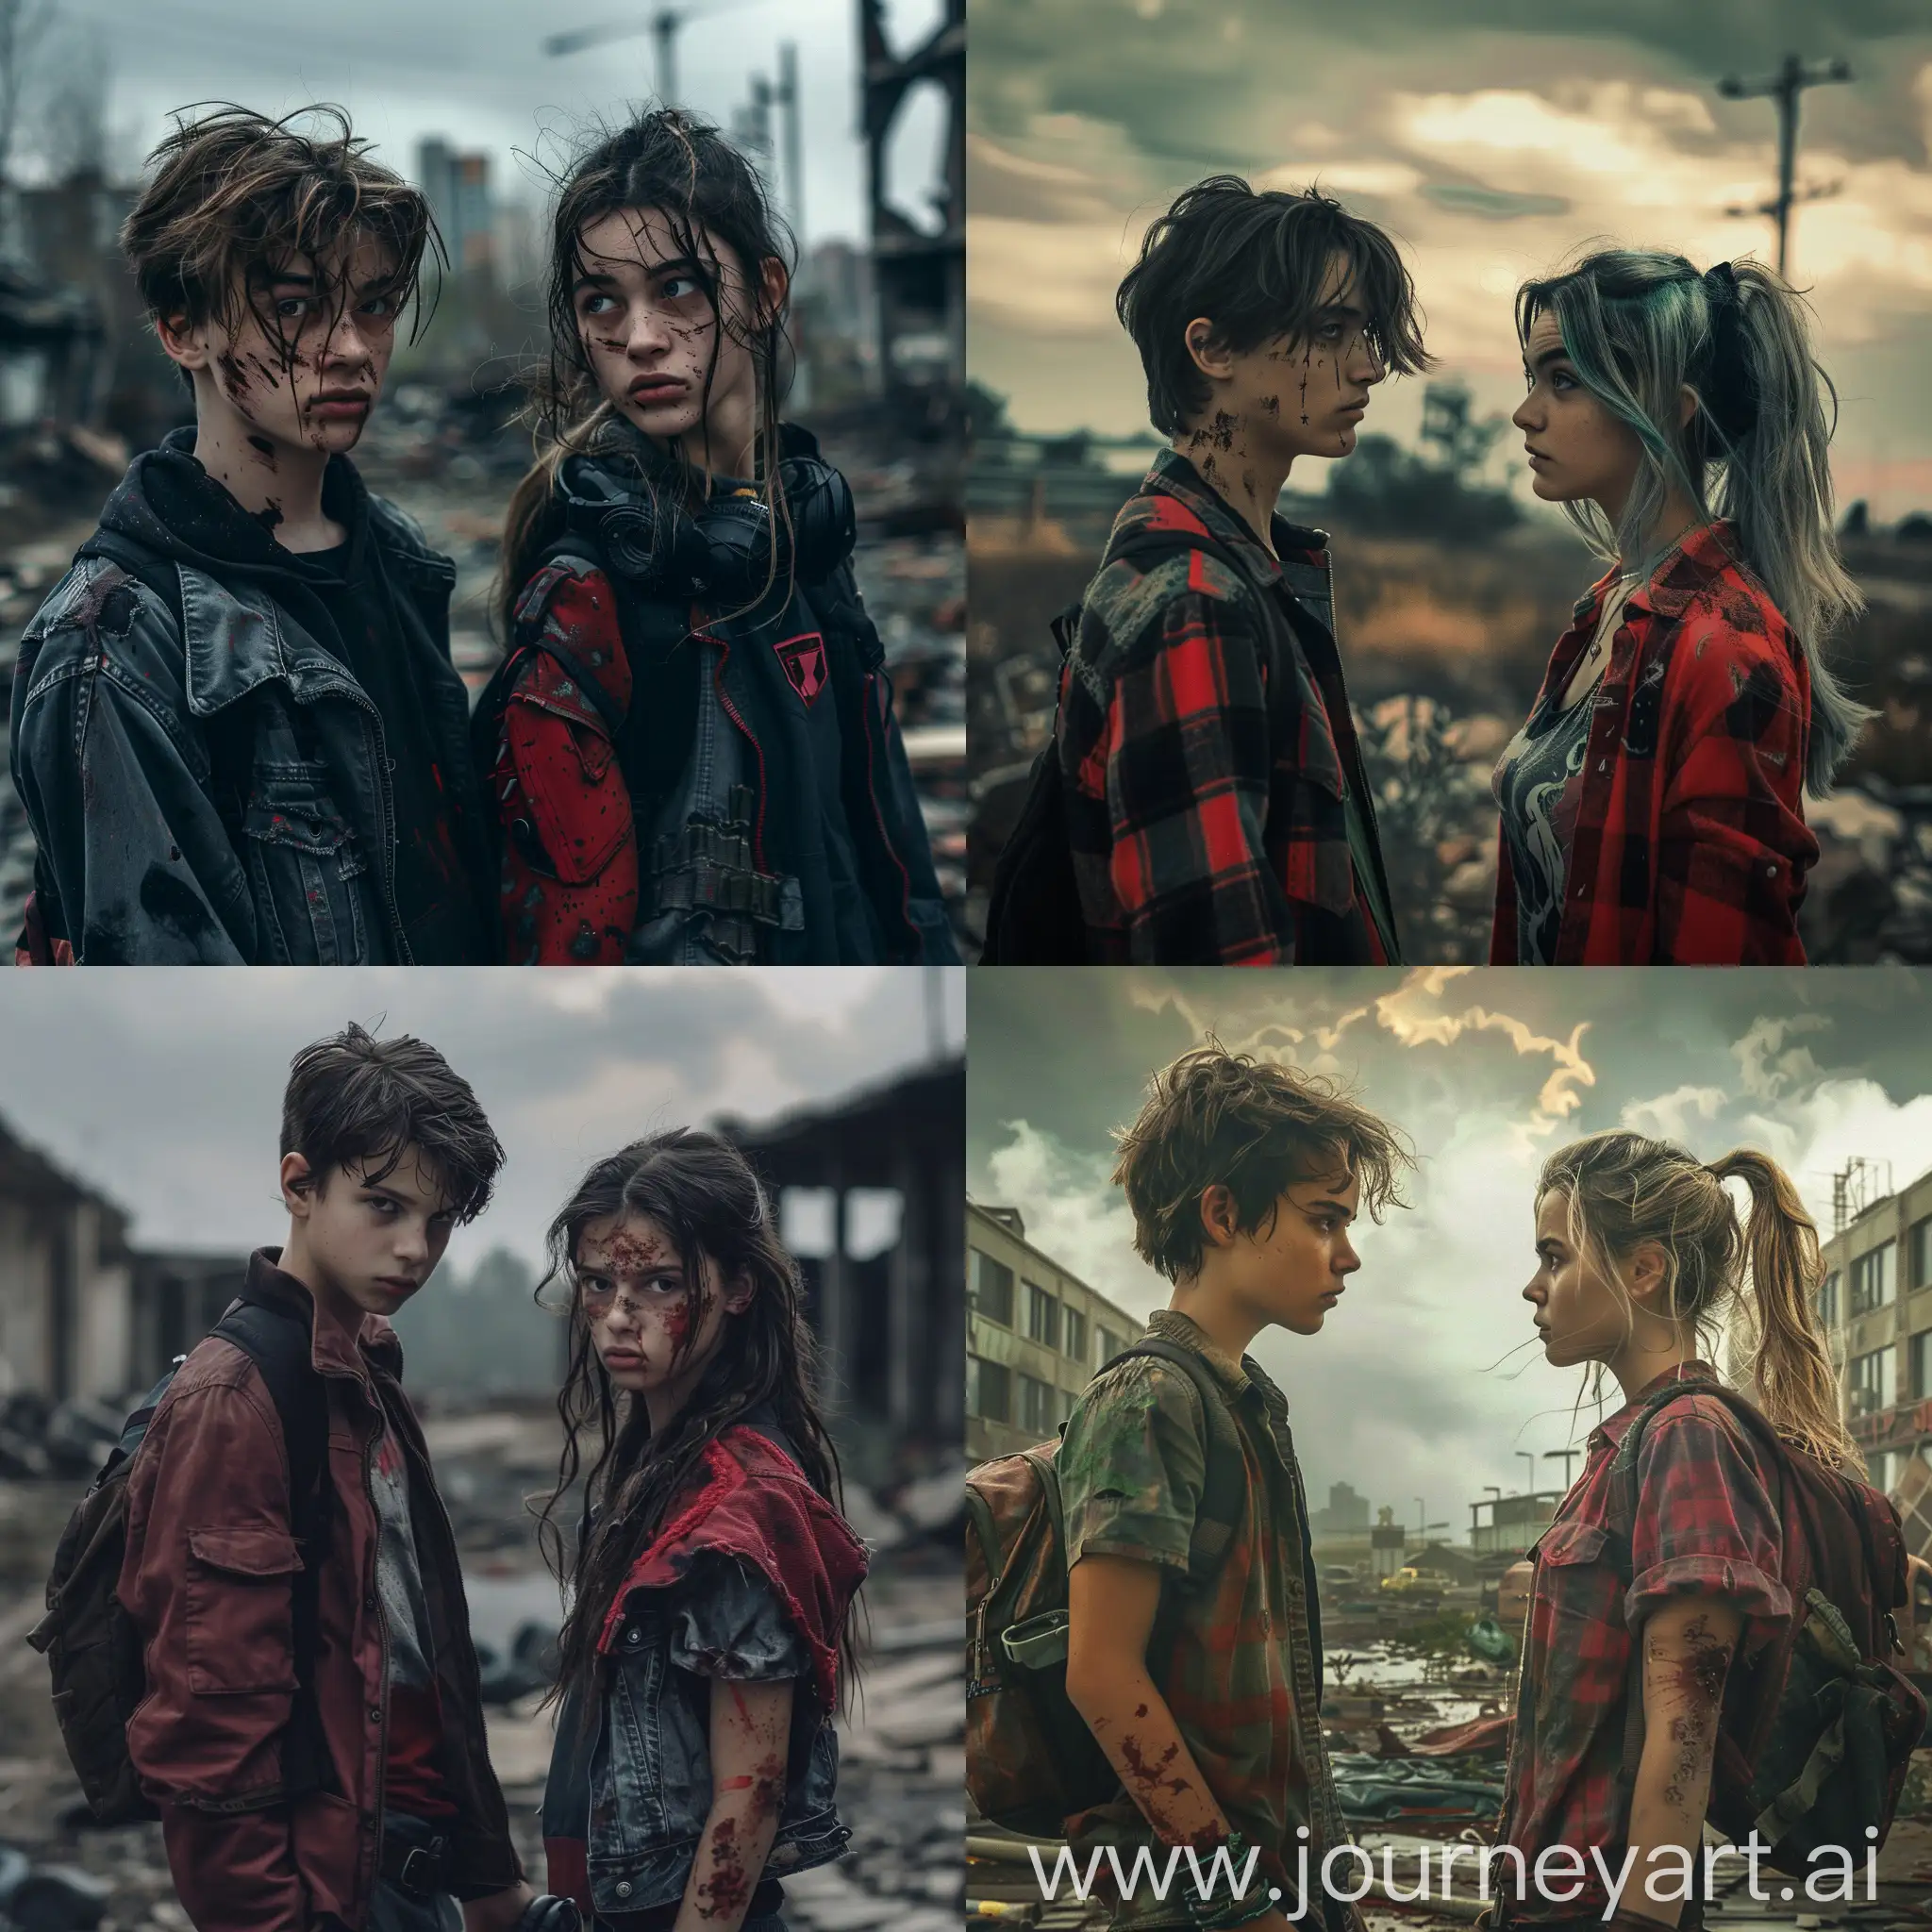 ultra realistic, two young people - a man and a woman, stand opposite each other gender war, woman against man in the scenery of the apocalypse